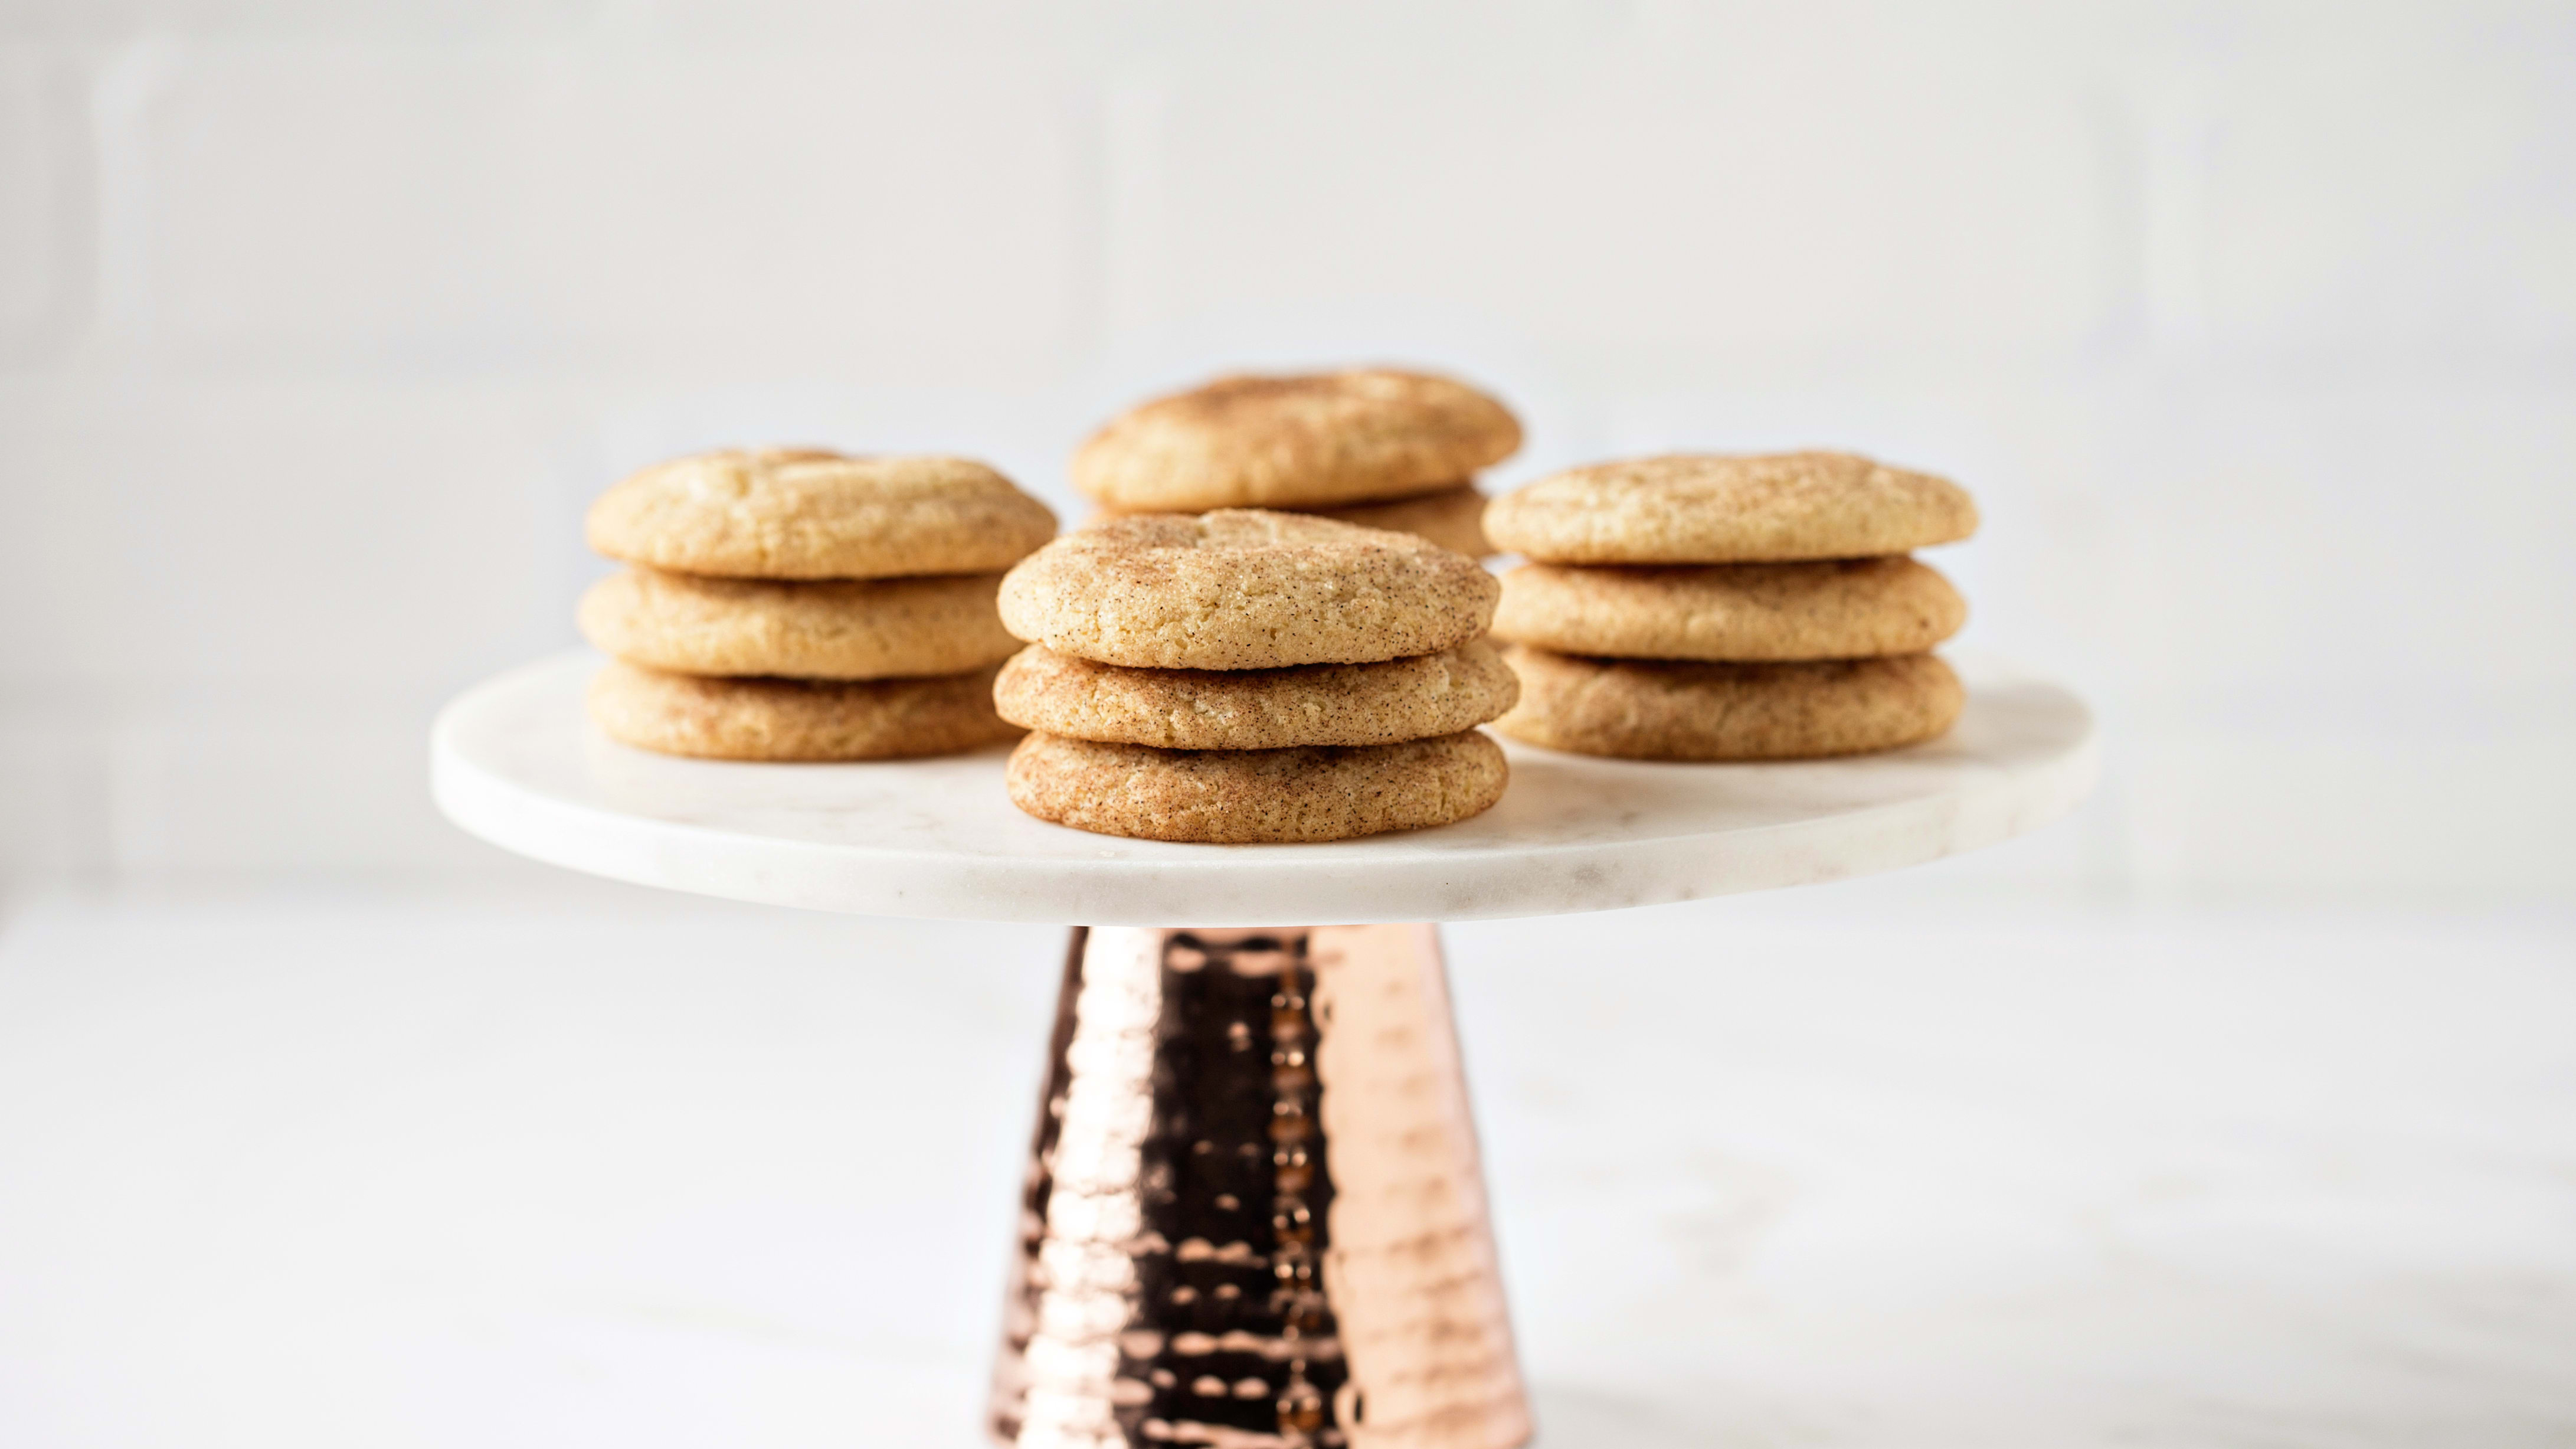 Jeff's Snickerdoodle Cookie Recipe + Affordable KitchenAid Mixer Sale